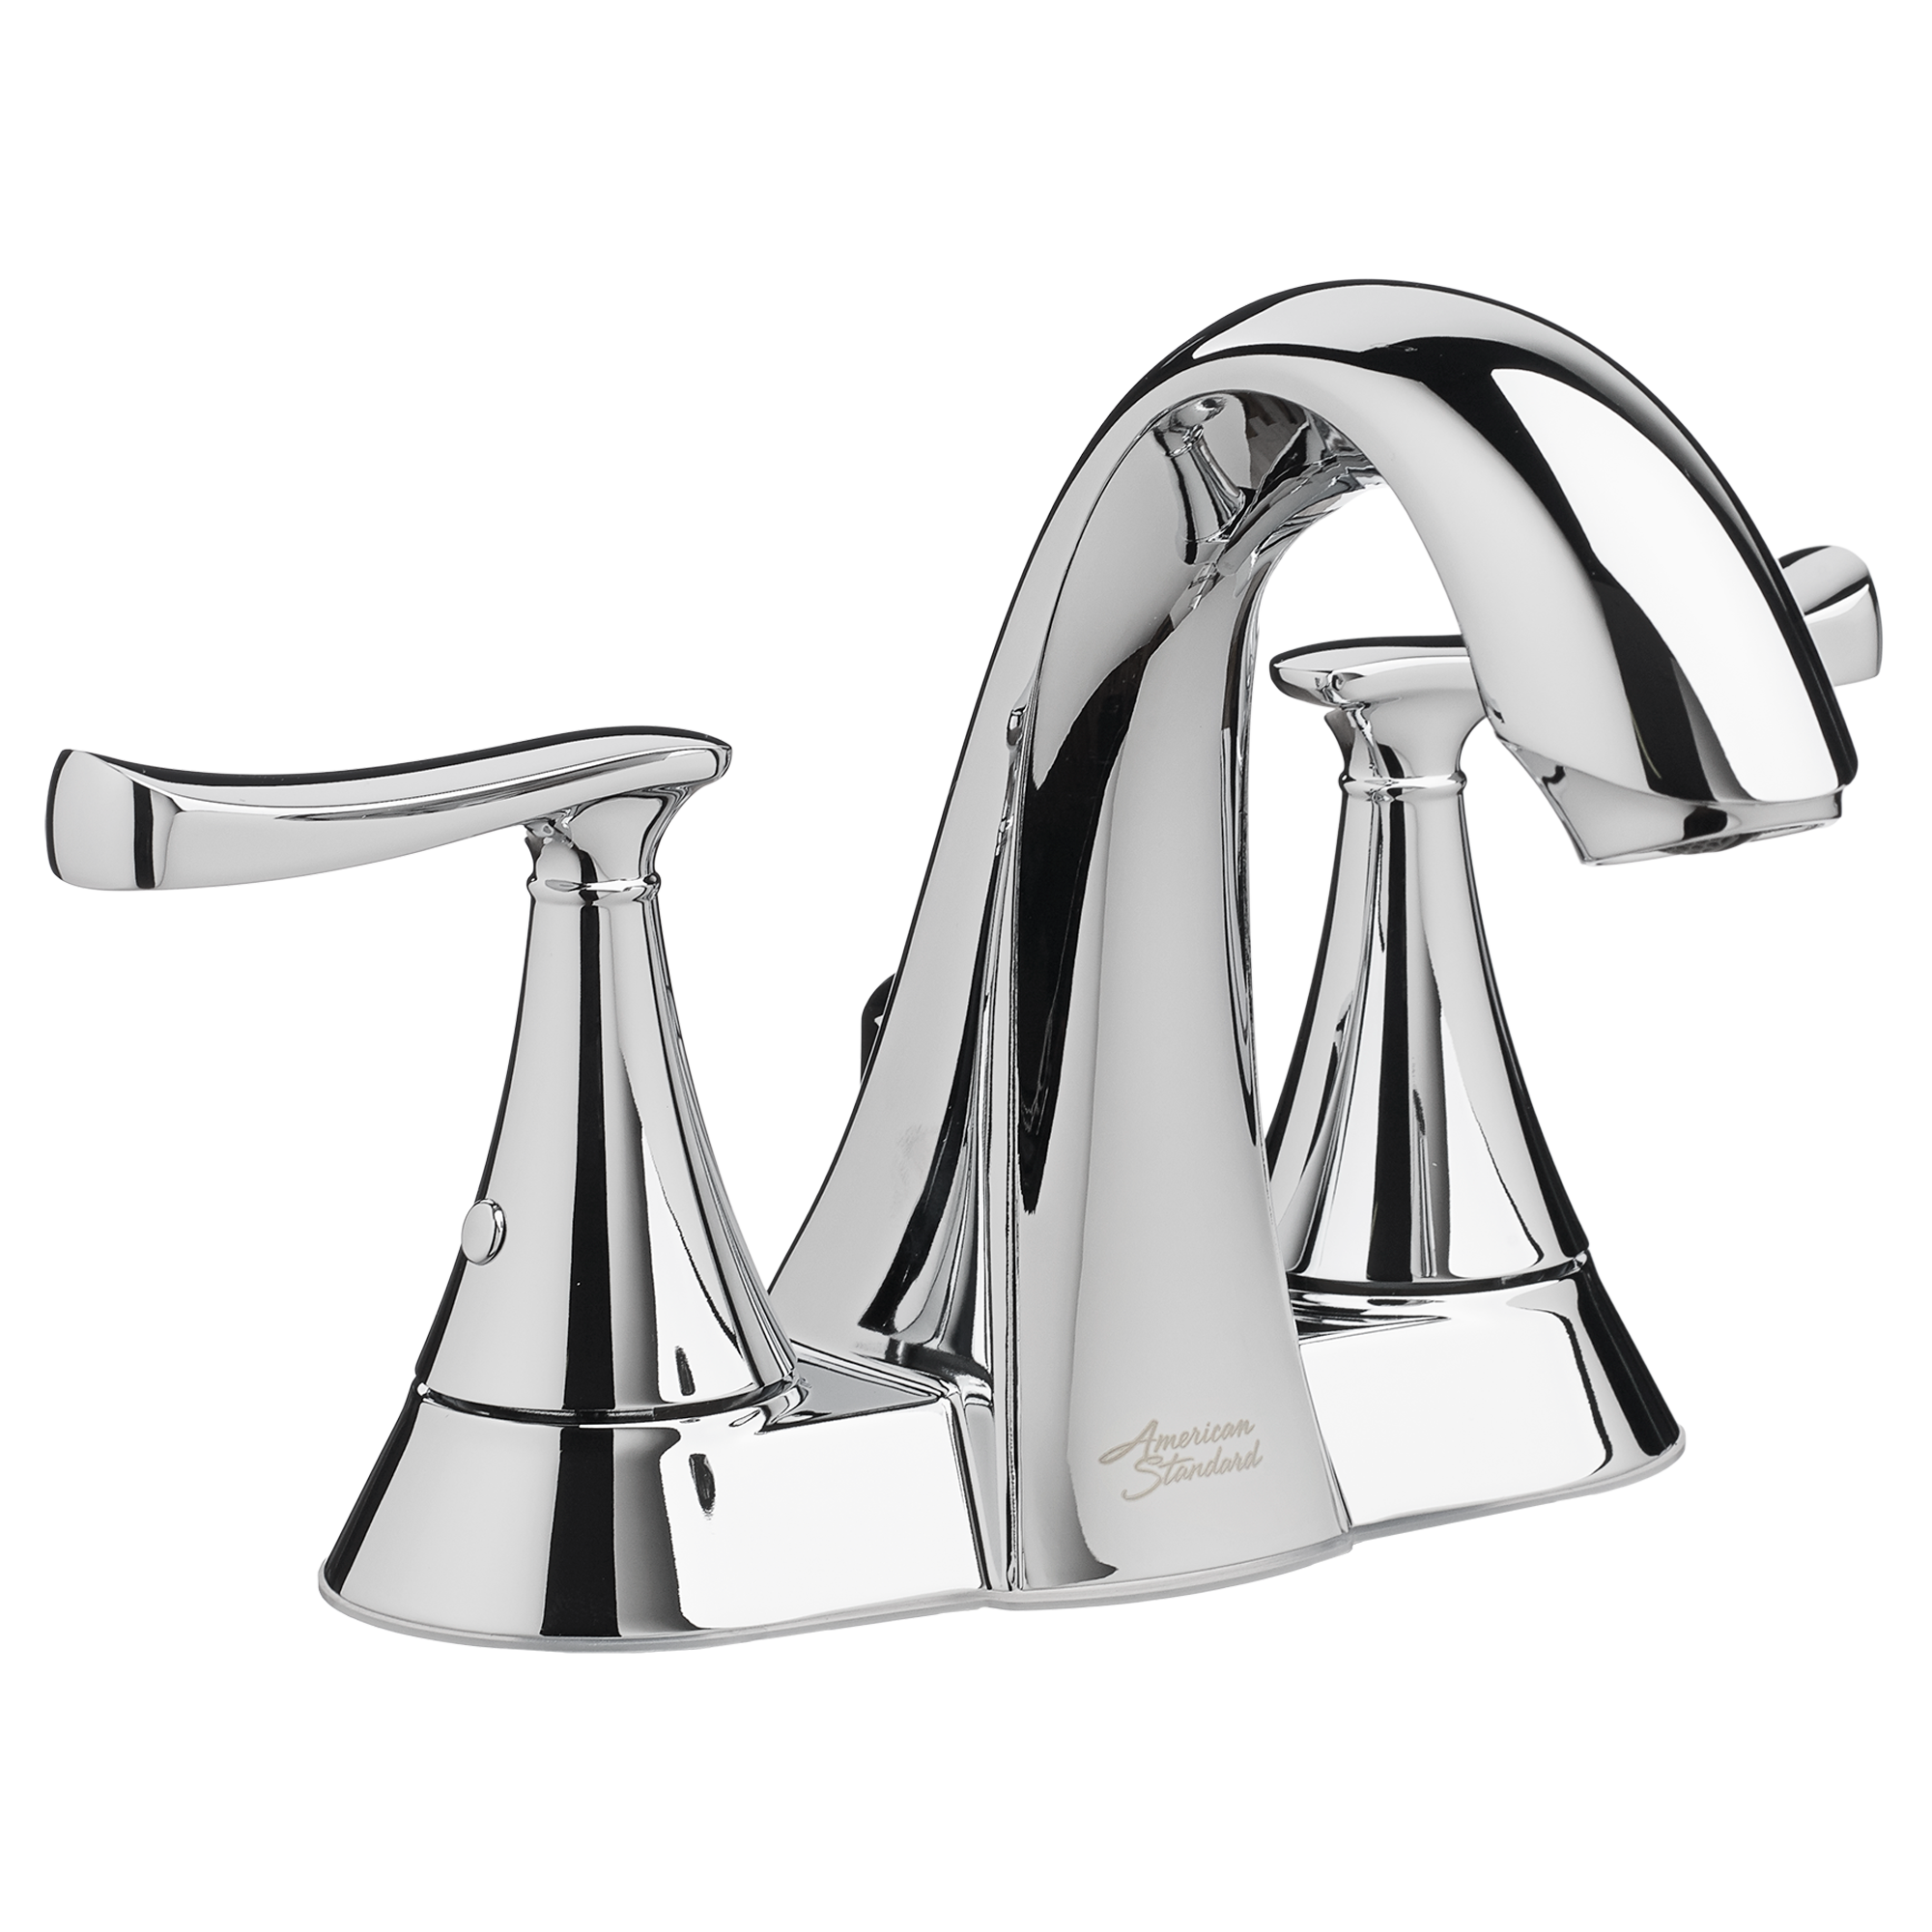 Faucet clipart pail with water, Faucet pail with water.